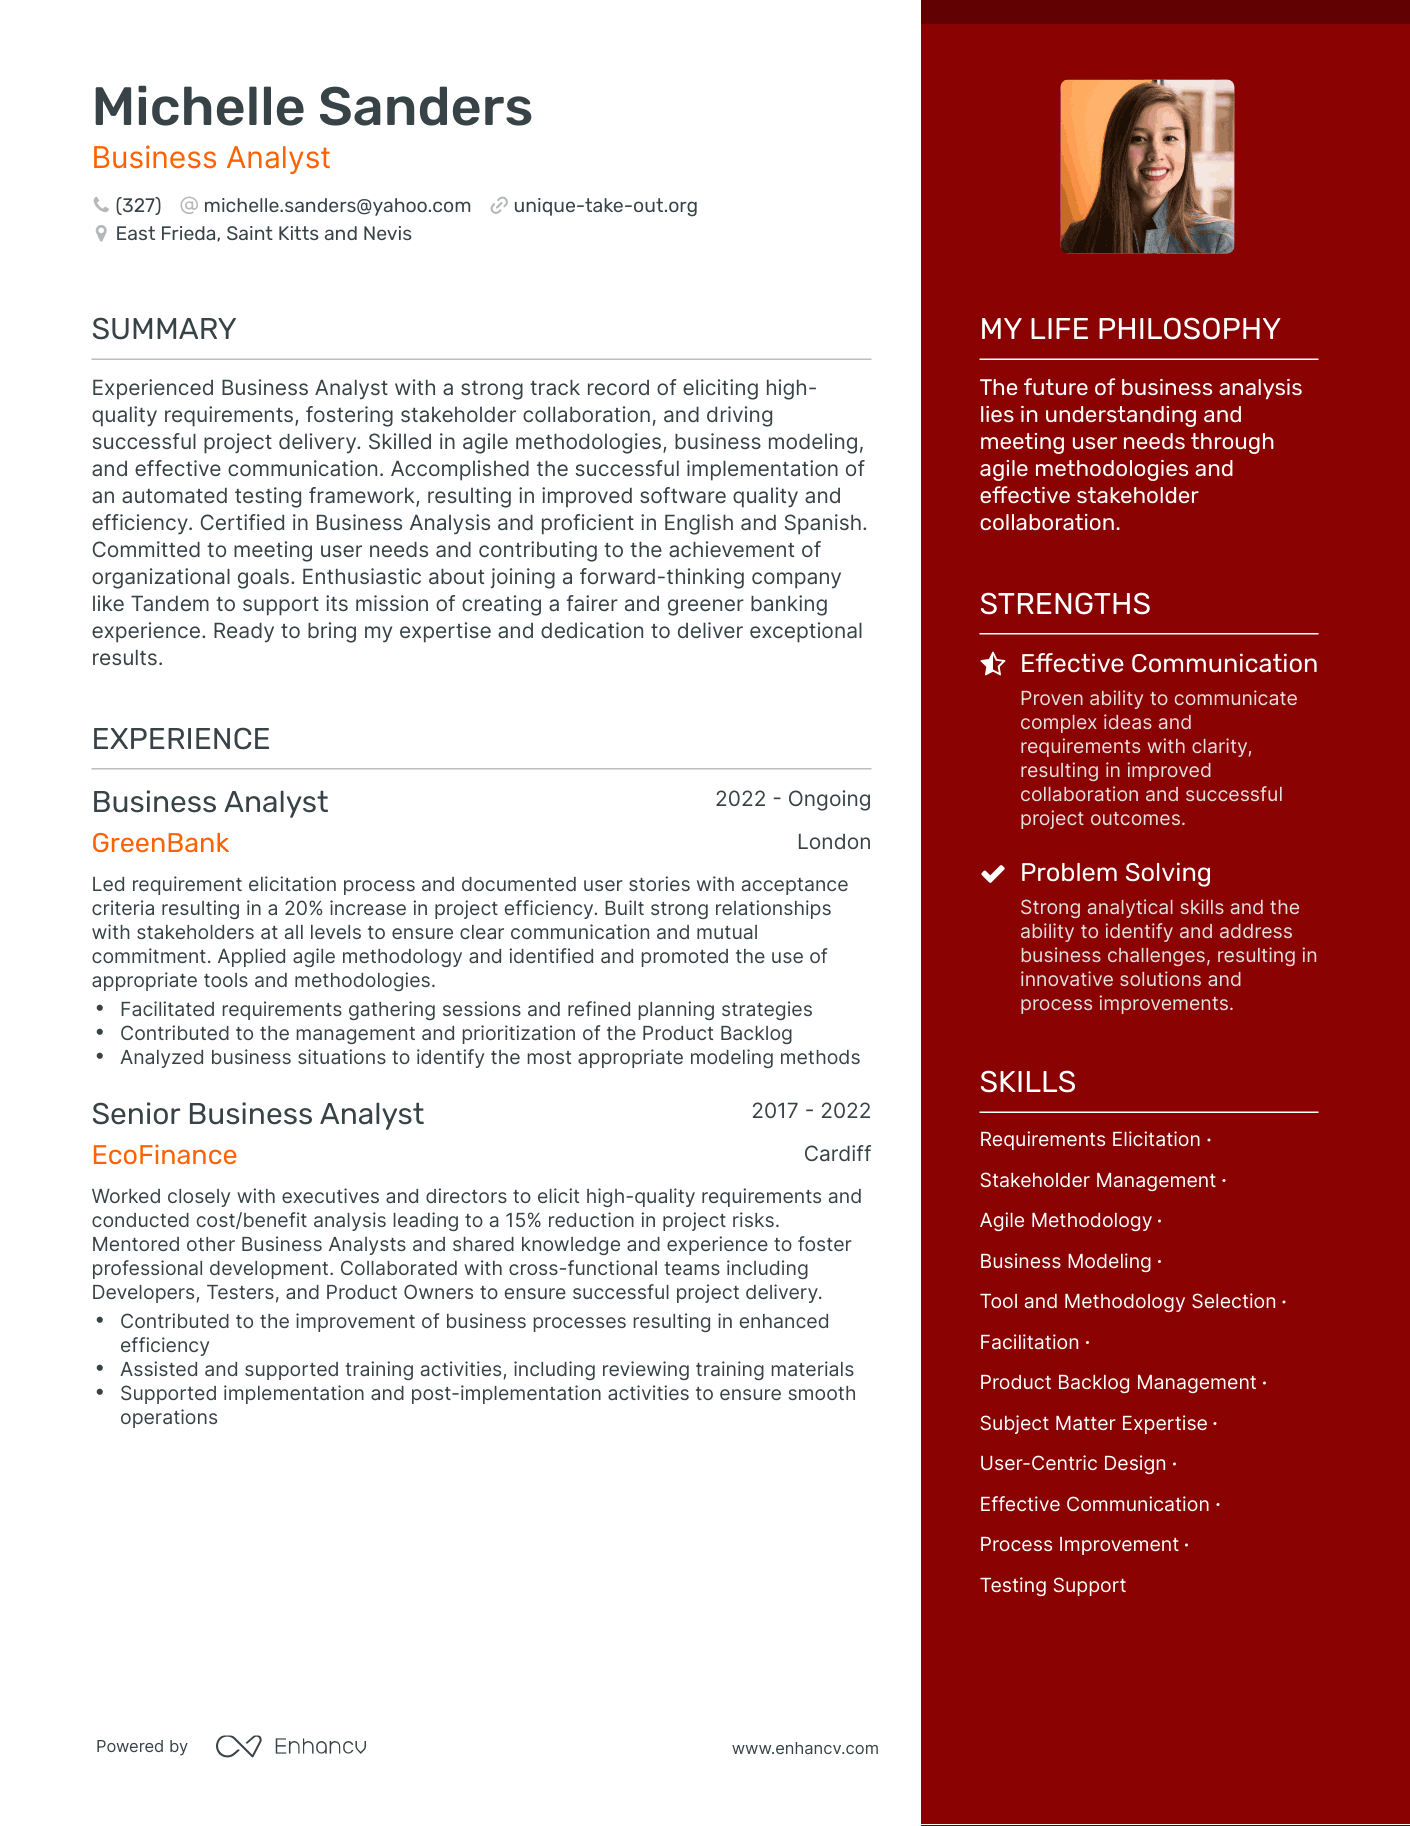 Business Analyst resume example